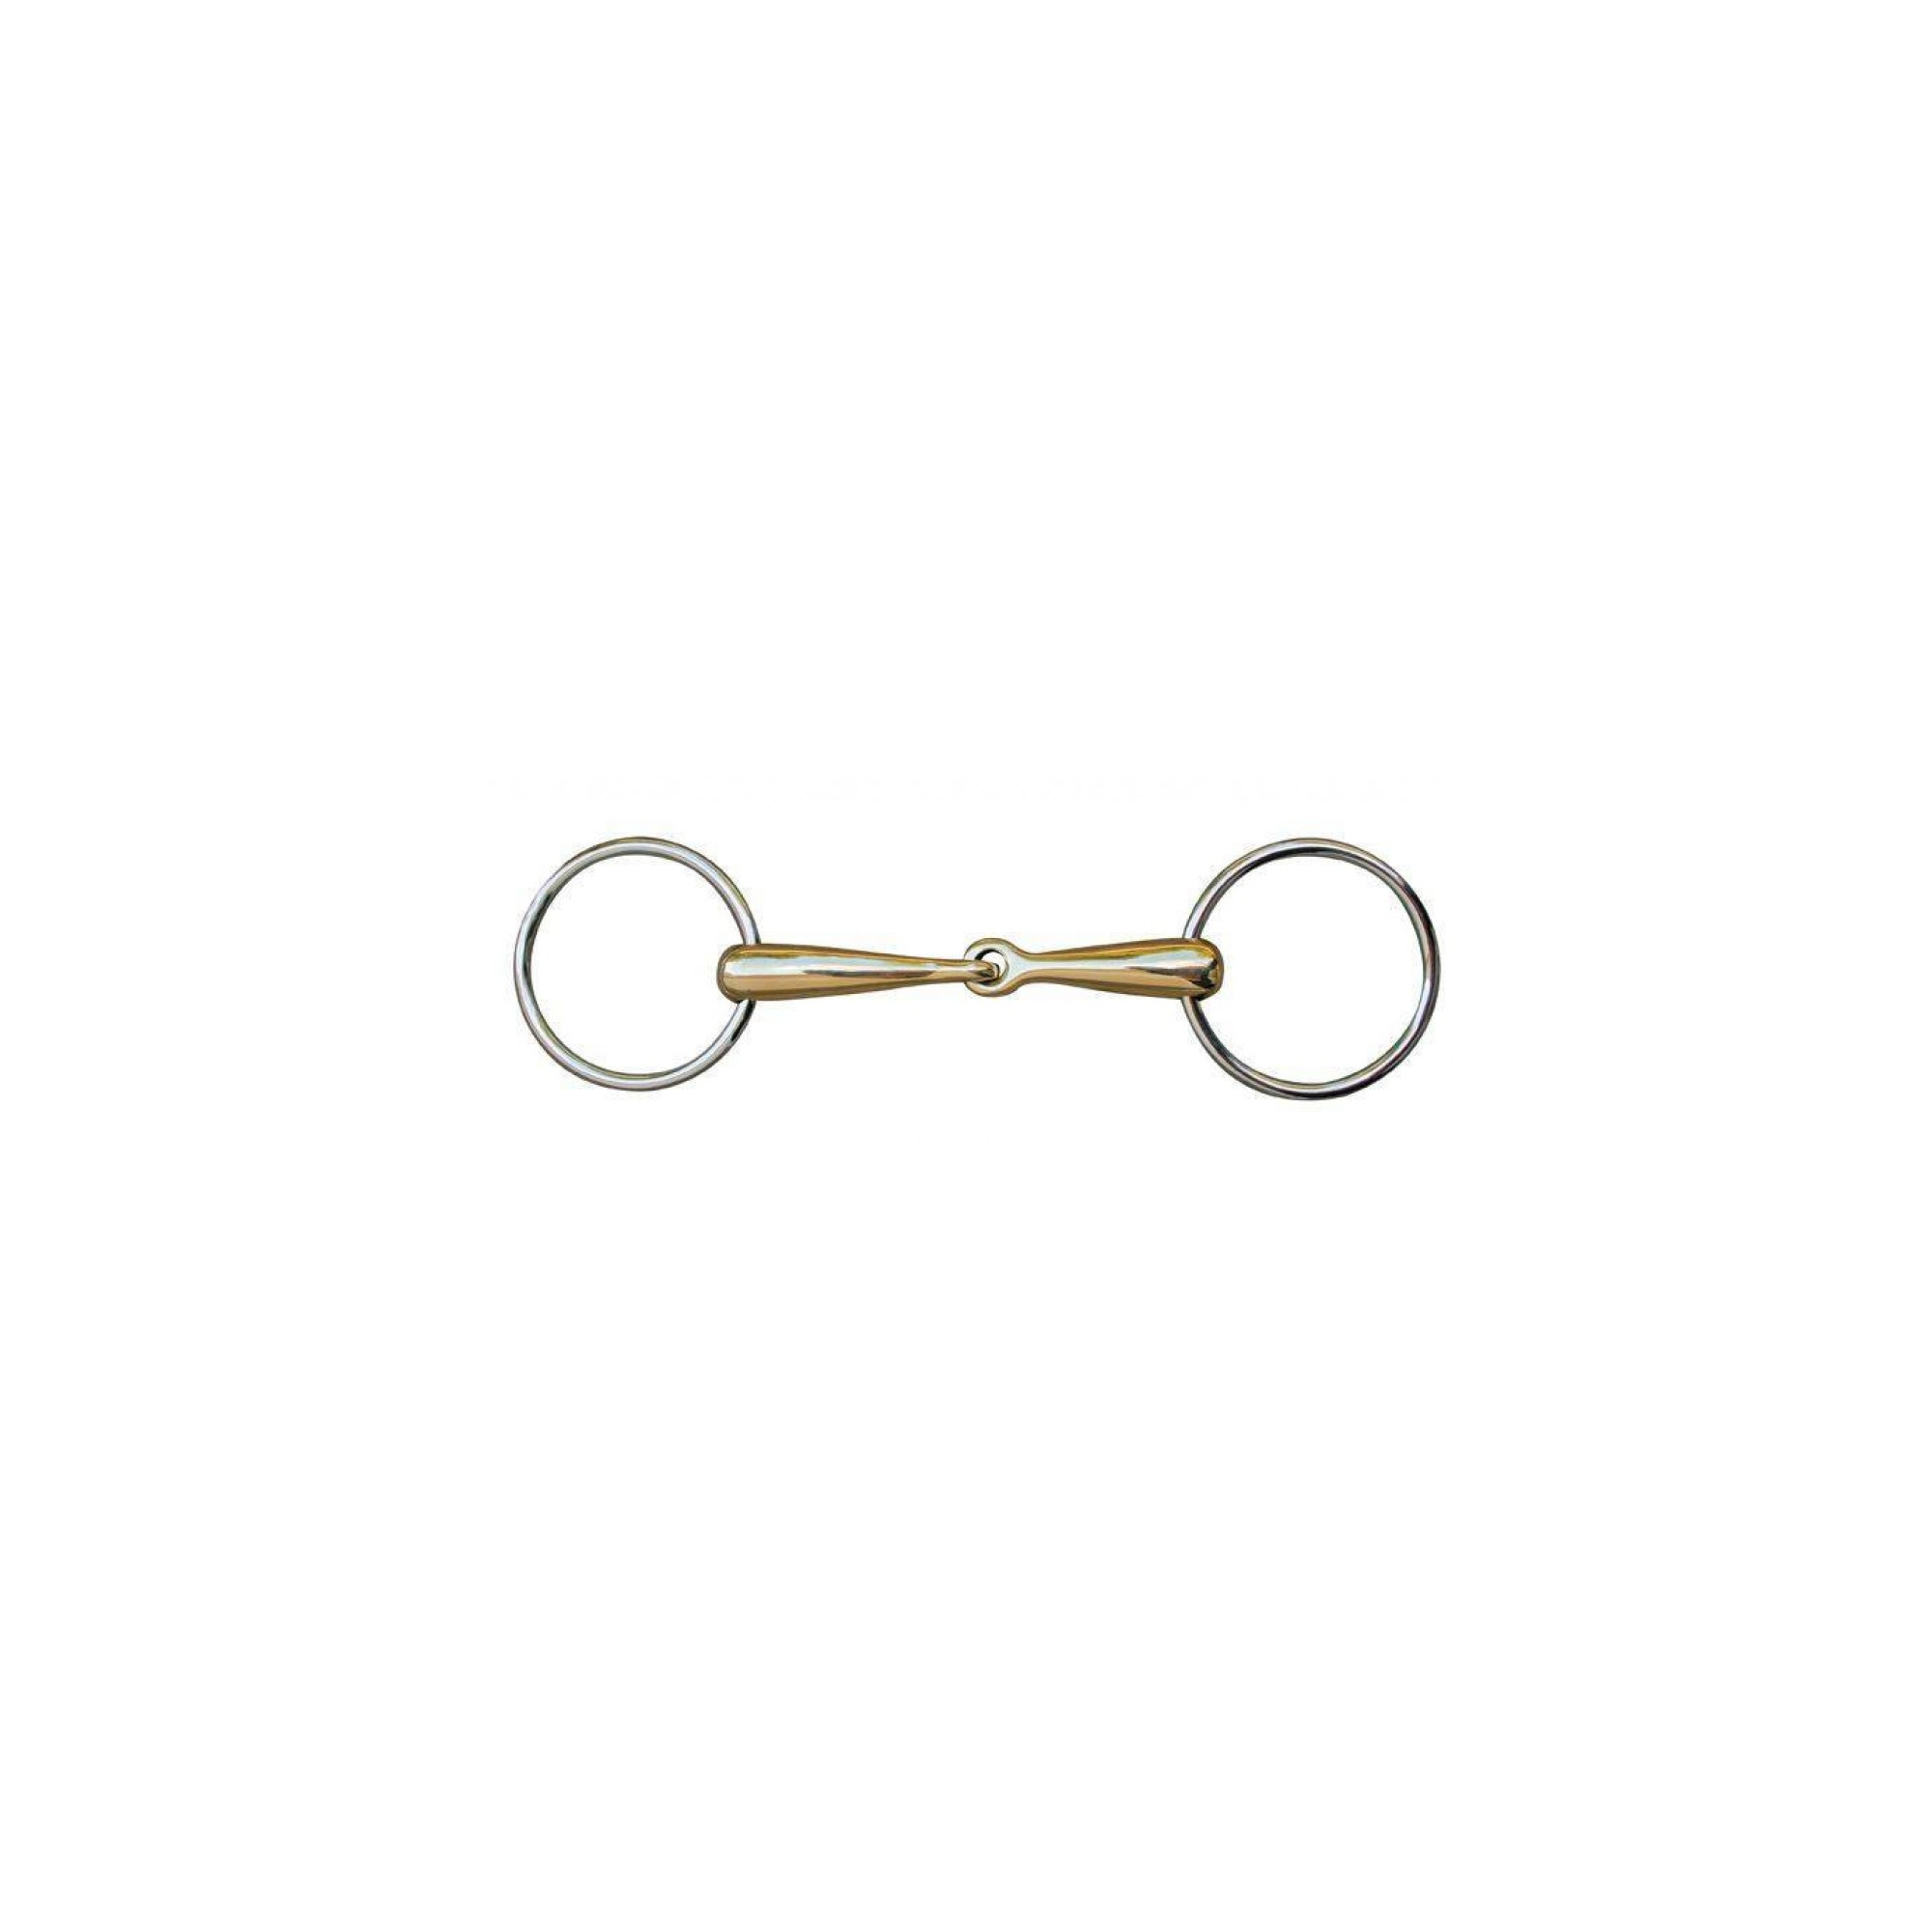 7cm Ring Bit Size 5" HKM Loose Ring Snaffle With Argentan Coating 18mm mouth